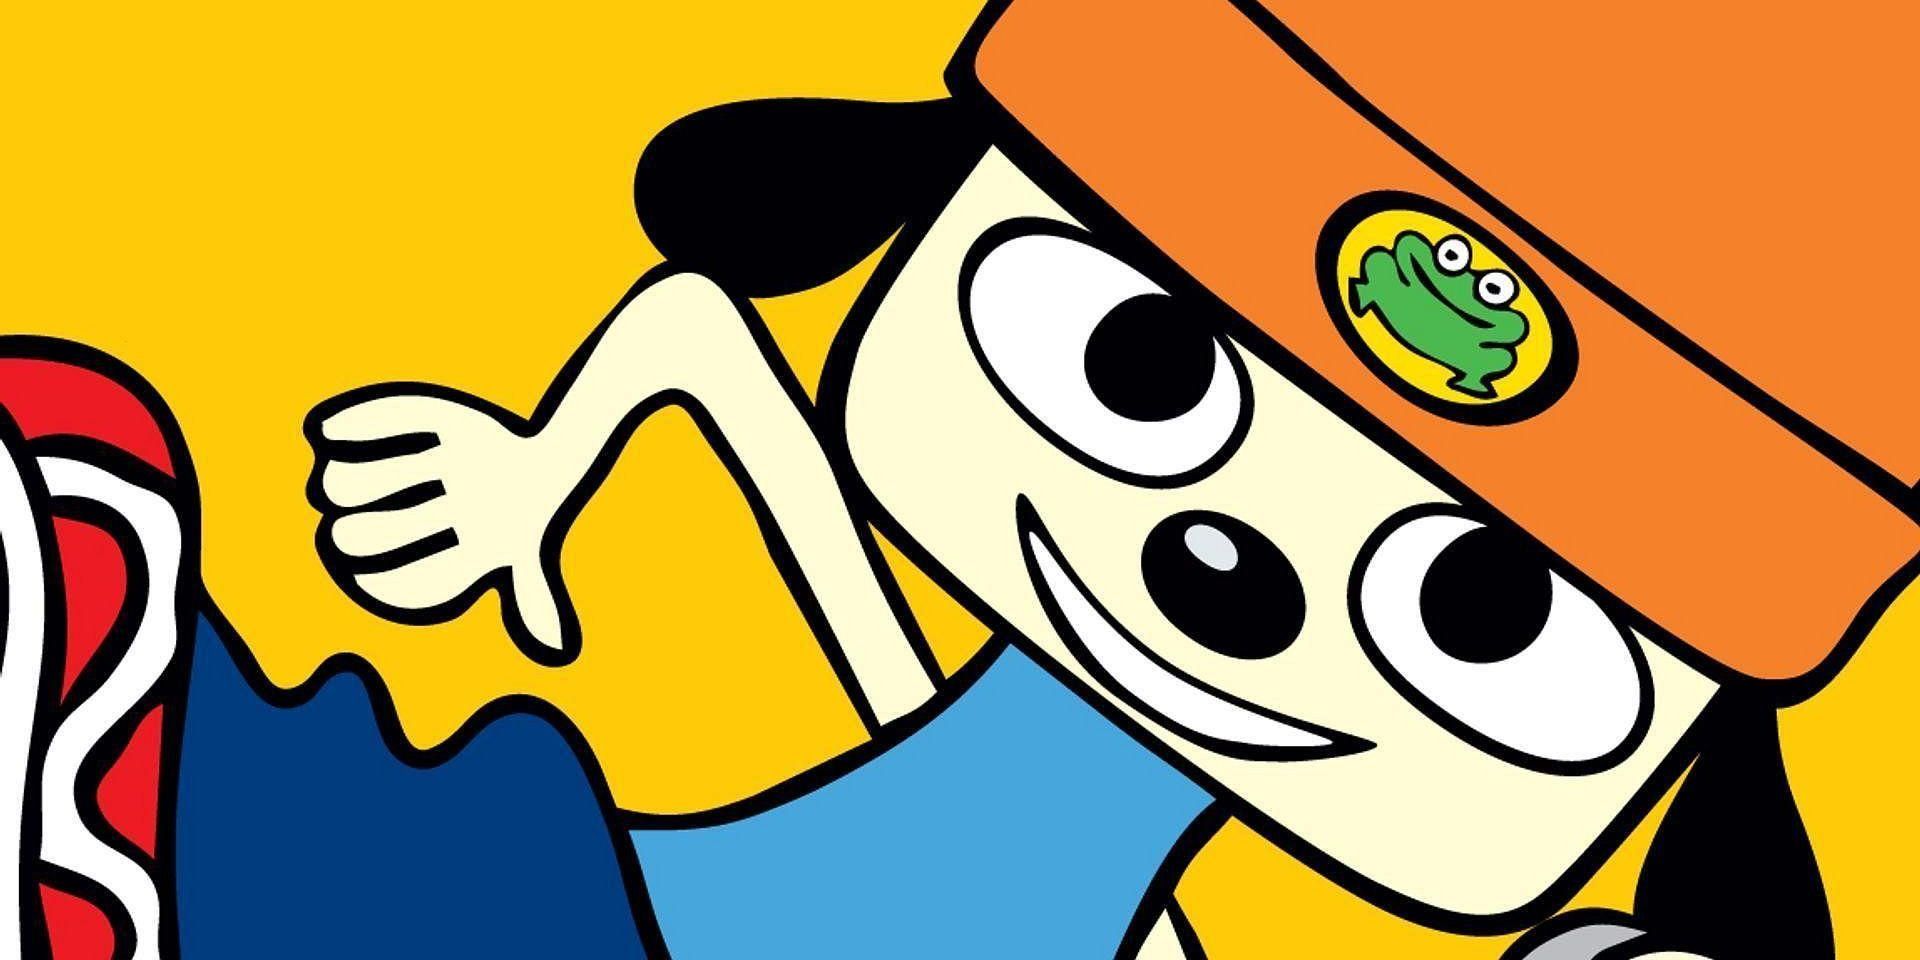 a picture of parappa the rapper from the game of the same name